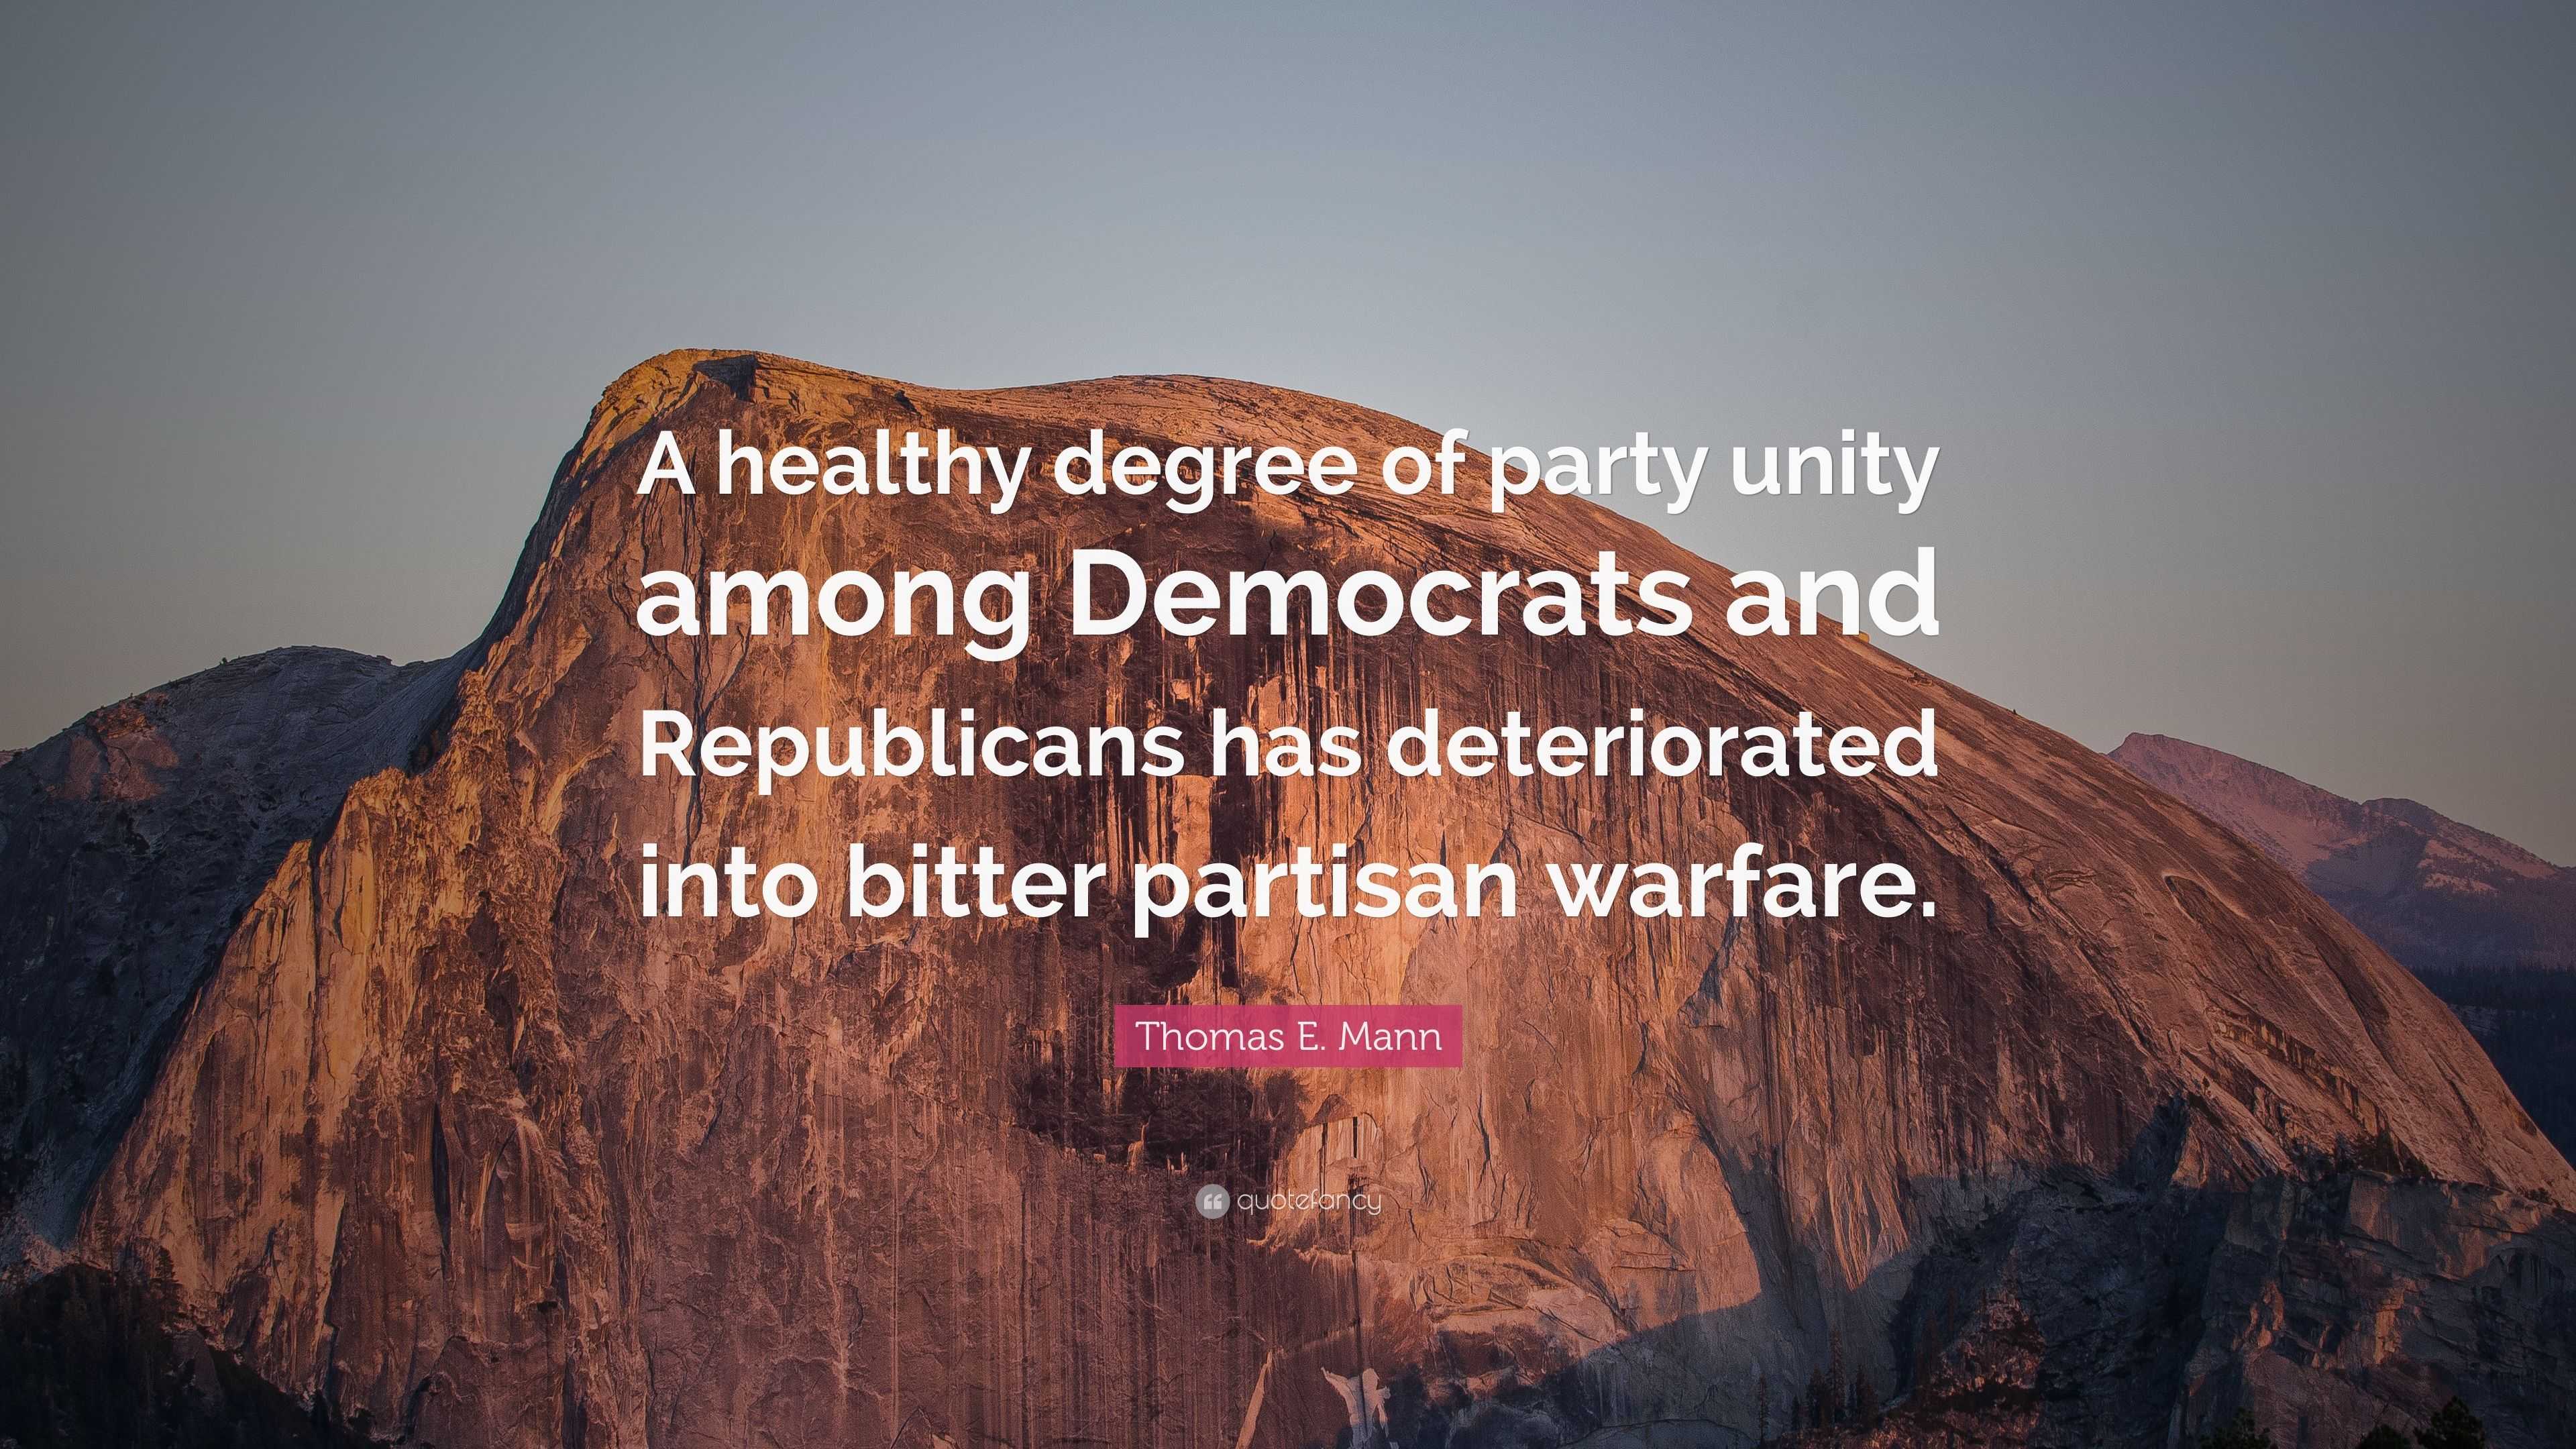 Thomas E Mann Quote “a Healthy Degree Of Party Unity Among Democrats And Republicans Has 8444